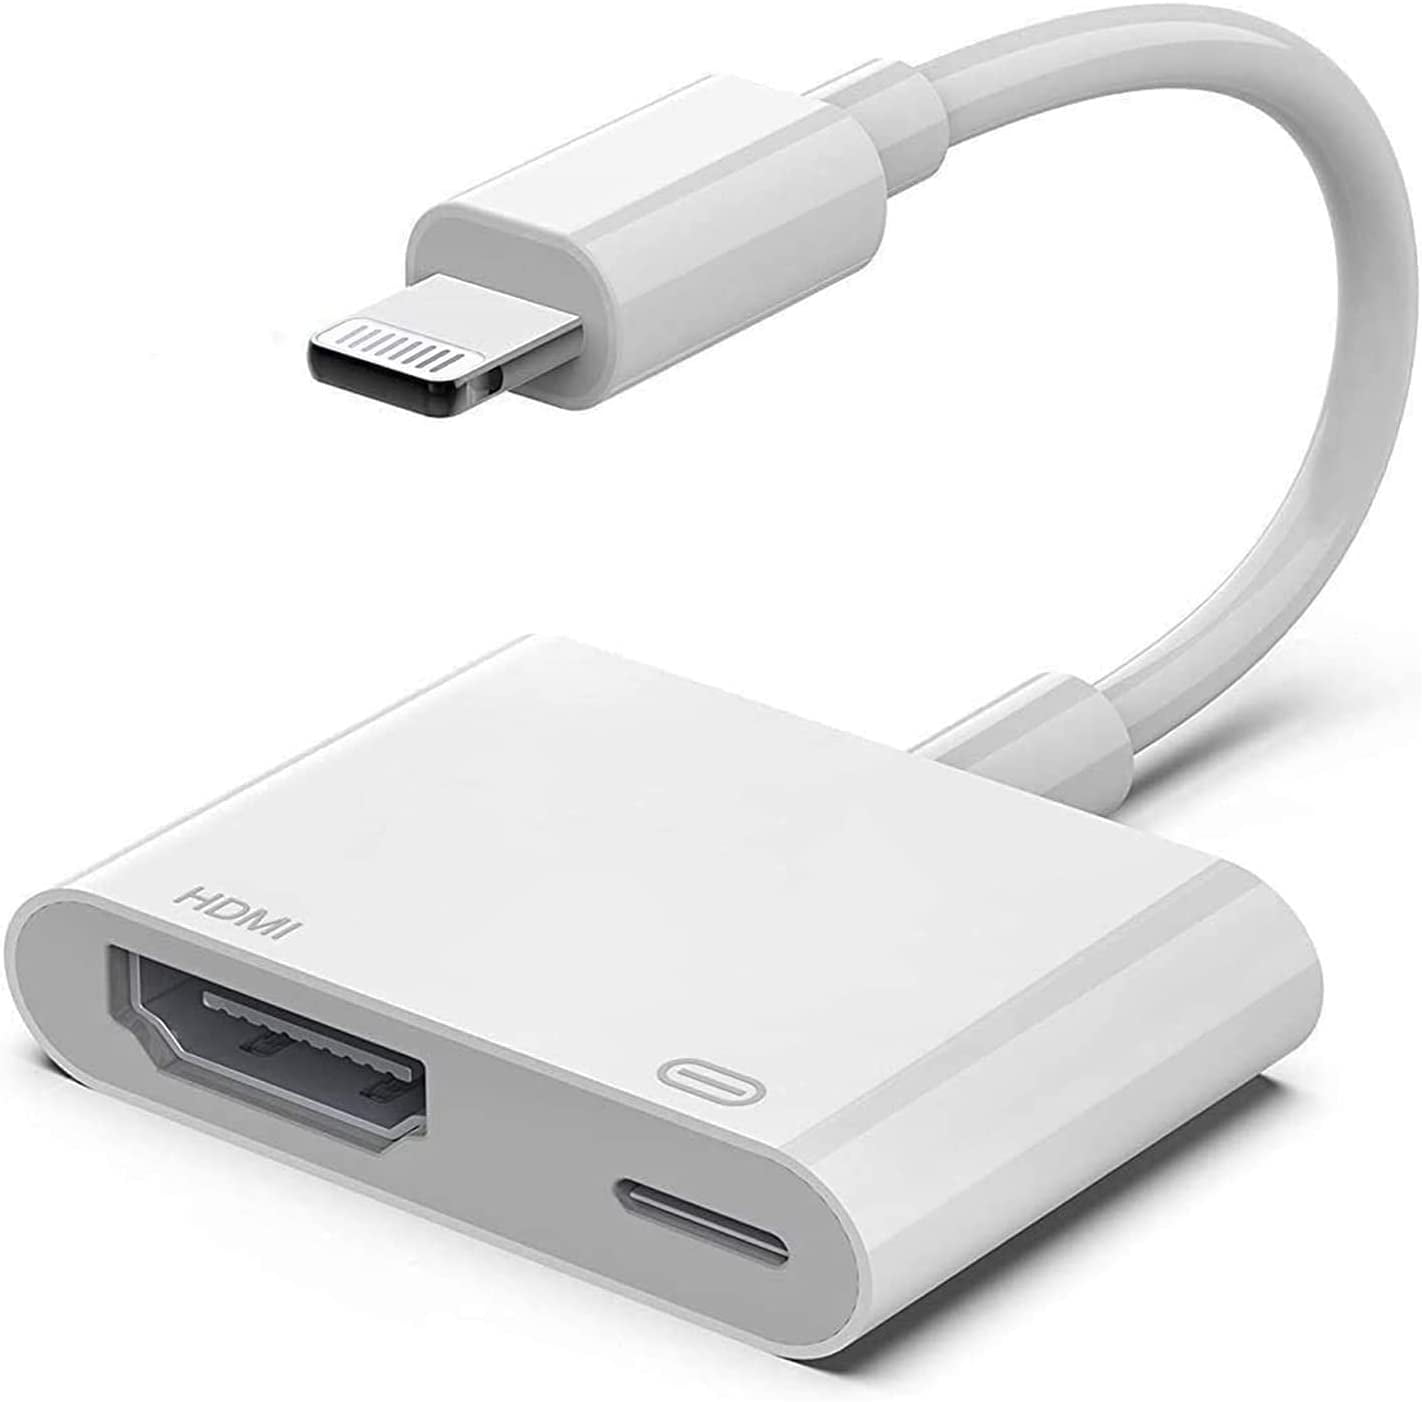 højdepunkt Spænding Signal Lightning to HDMI Adapter, (Apple MFi Certified) 1080P Digital AV Adapter  Sync Screen Connector Cable Compatibility with iPhone  13/12/11/X/8/iPad/iPod to HDTV/Monitor/Projector - Walmart.com